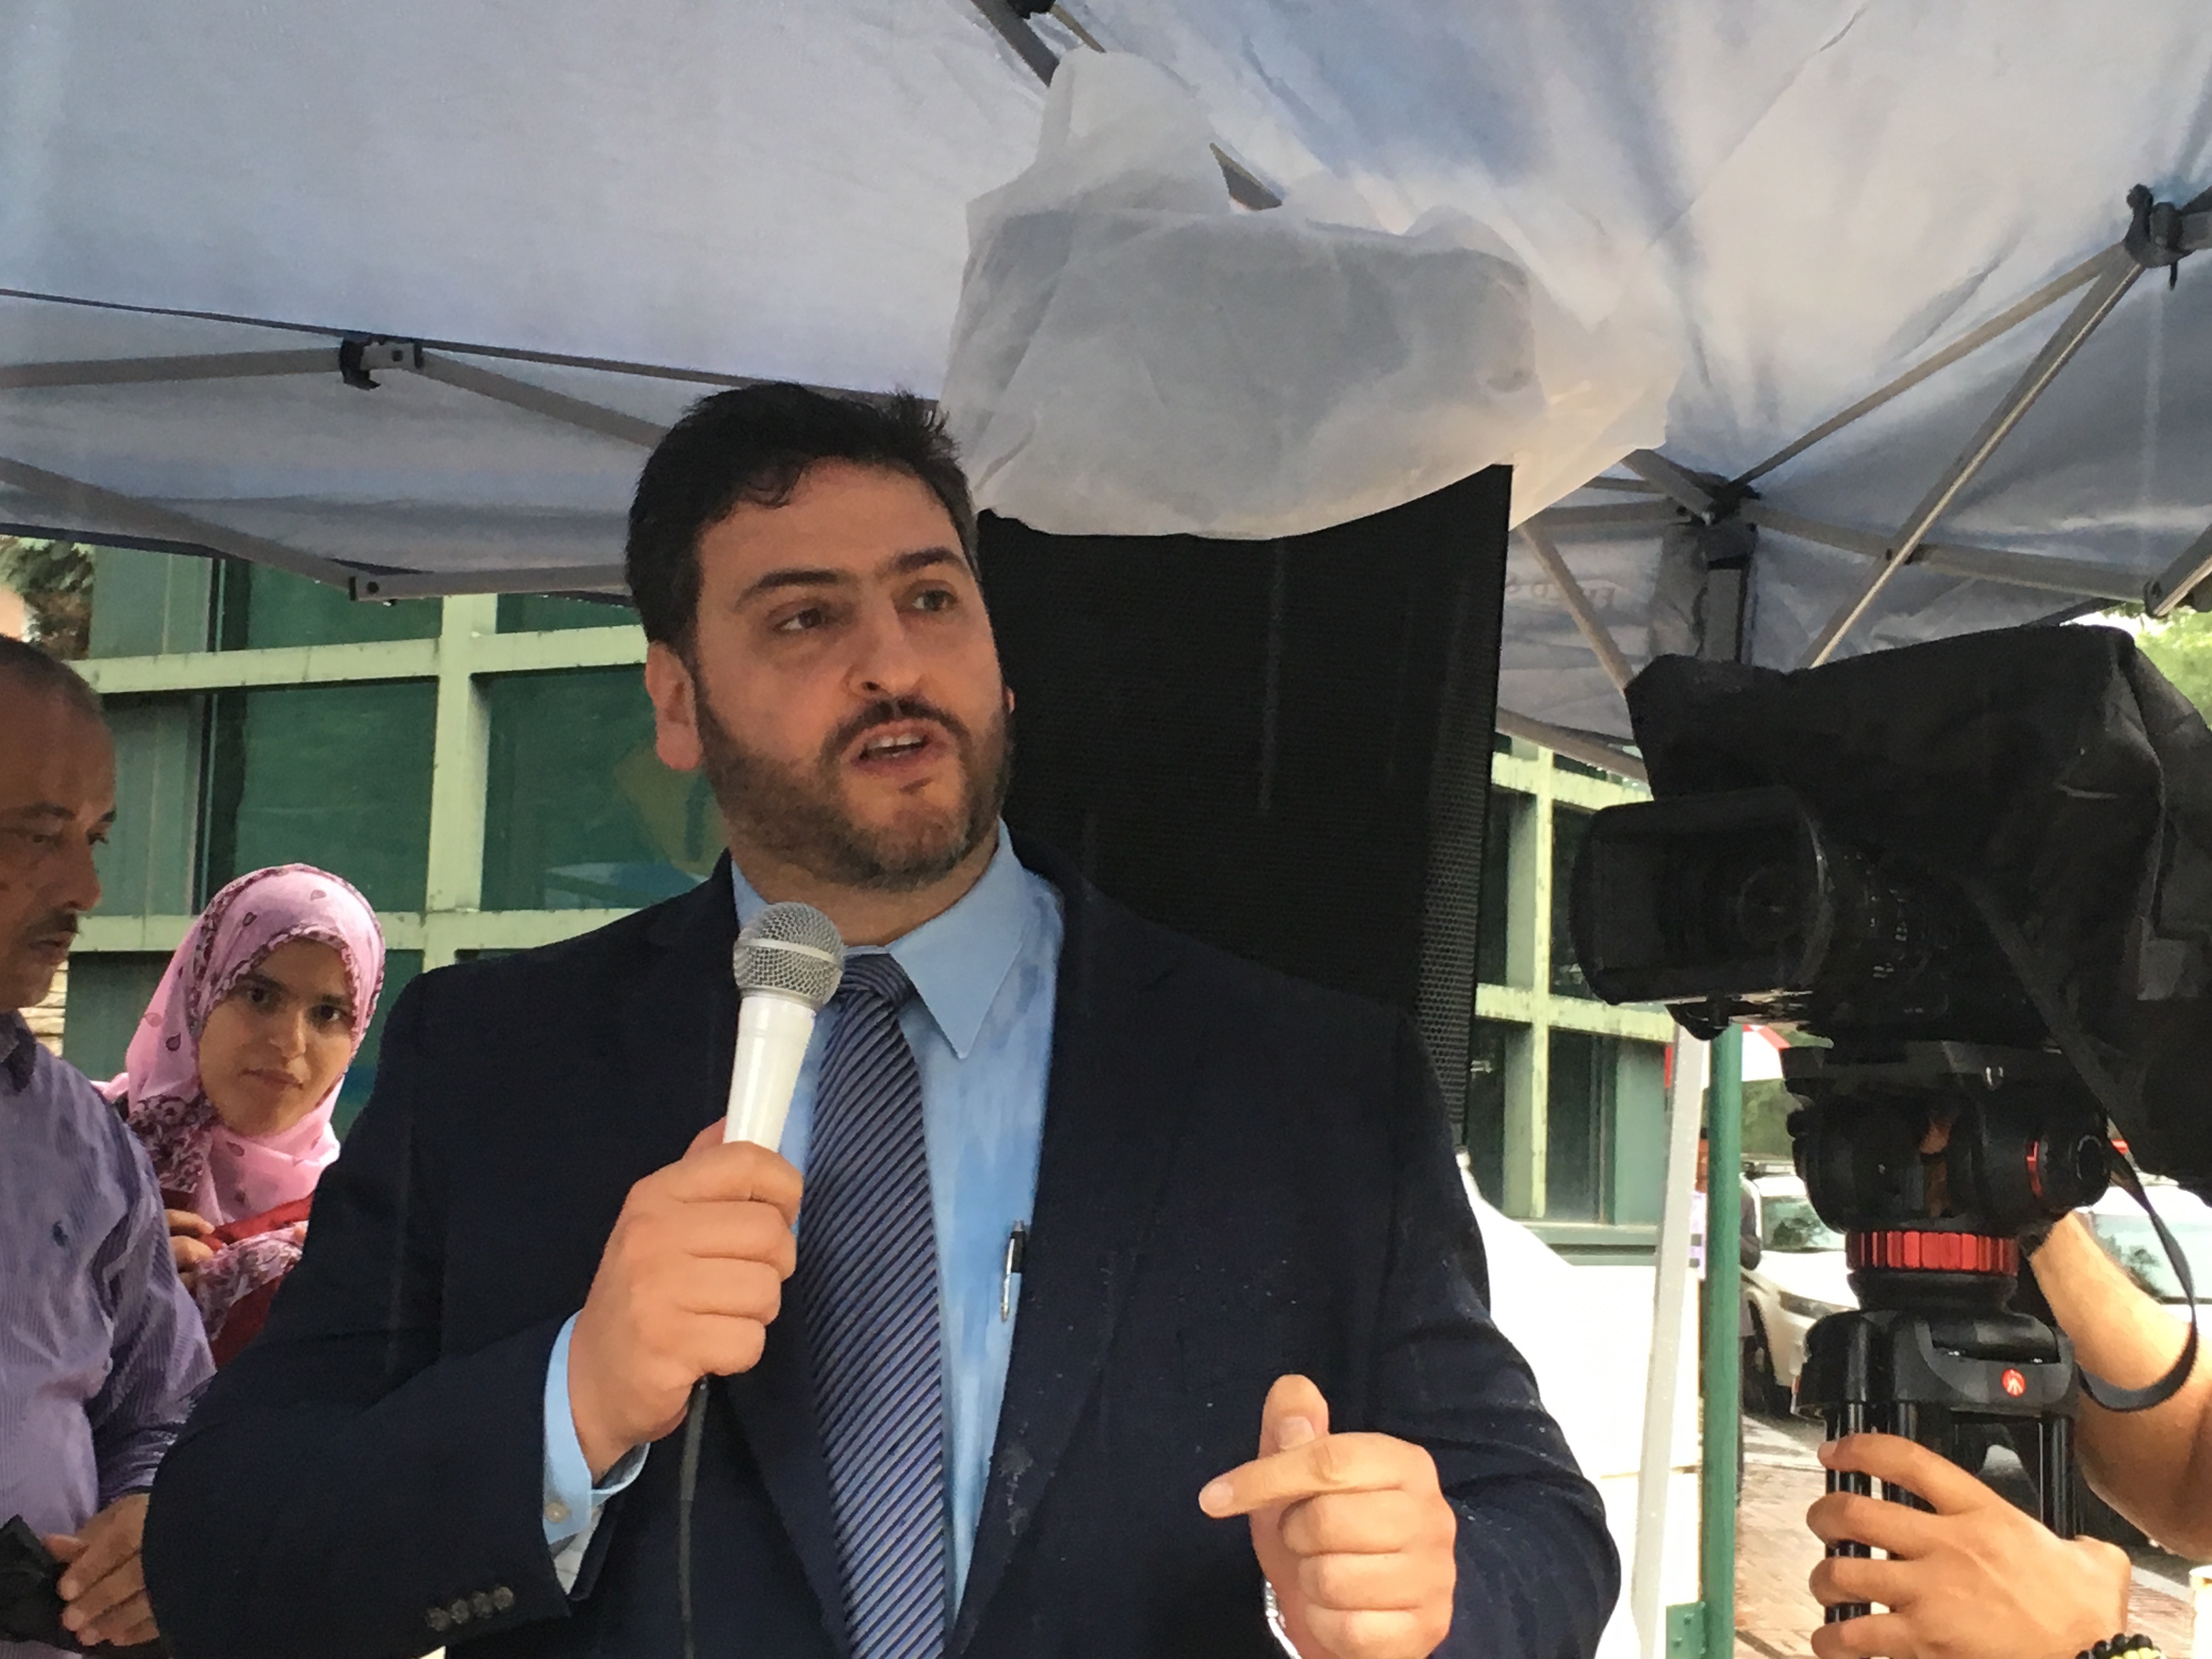 Osama Abuirshaid, AMP national policy director, delivers the sermon during Friday prayers outside the Israeli embassy in Washington D.C.